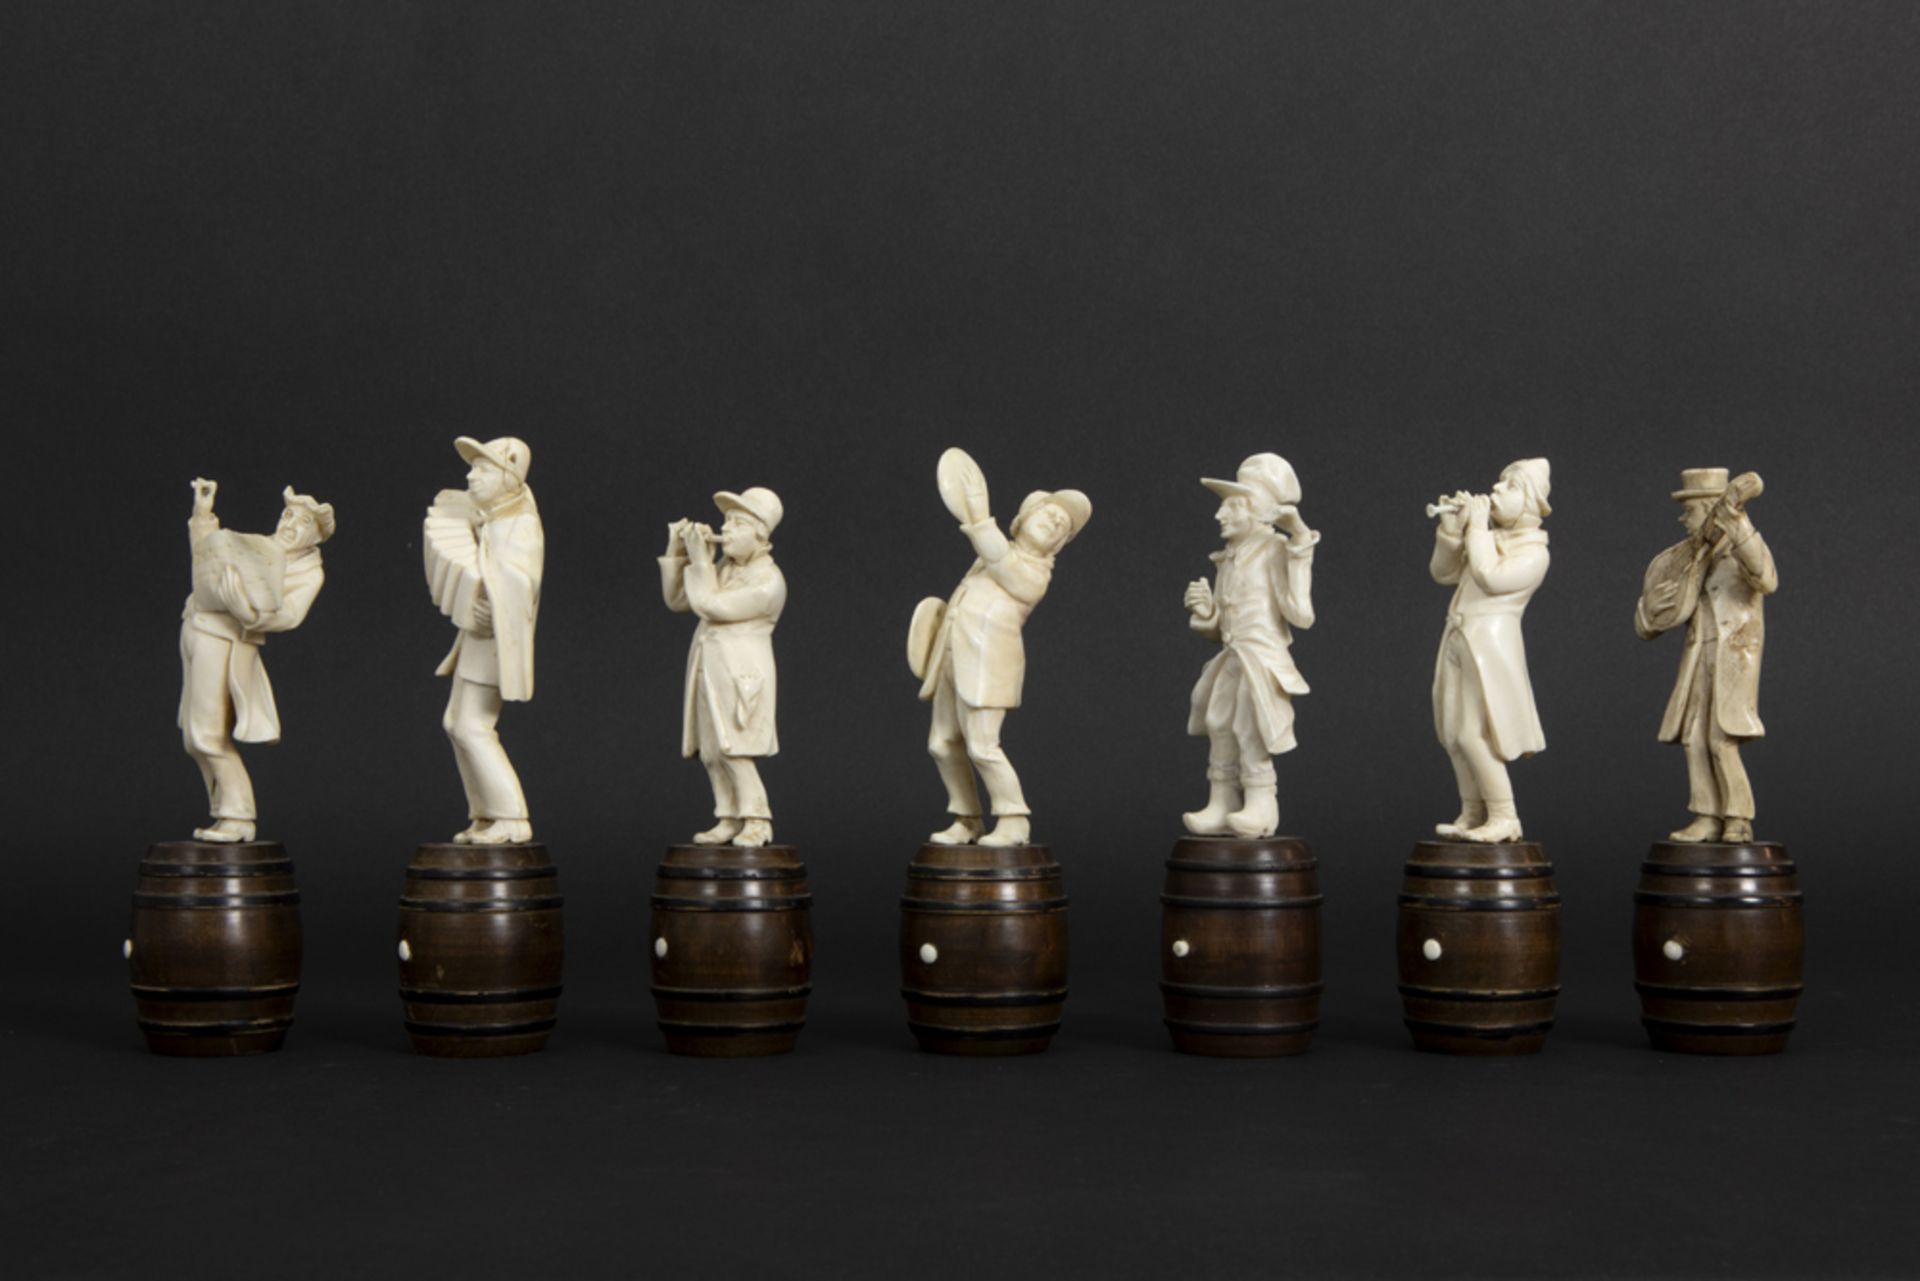 set of seven small antique figures in ivory, each standing on a wooden barrel - depicting a band - Image 3 of 6